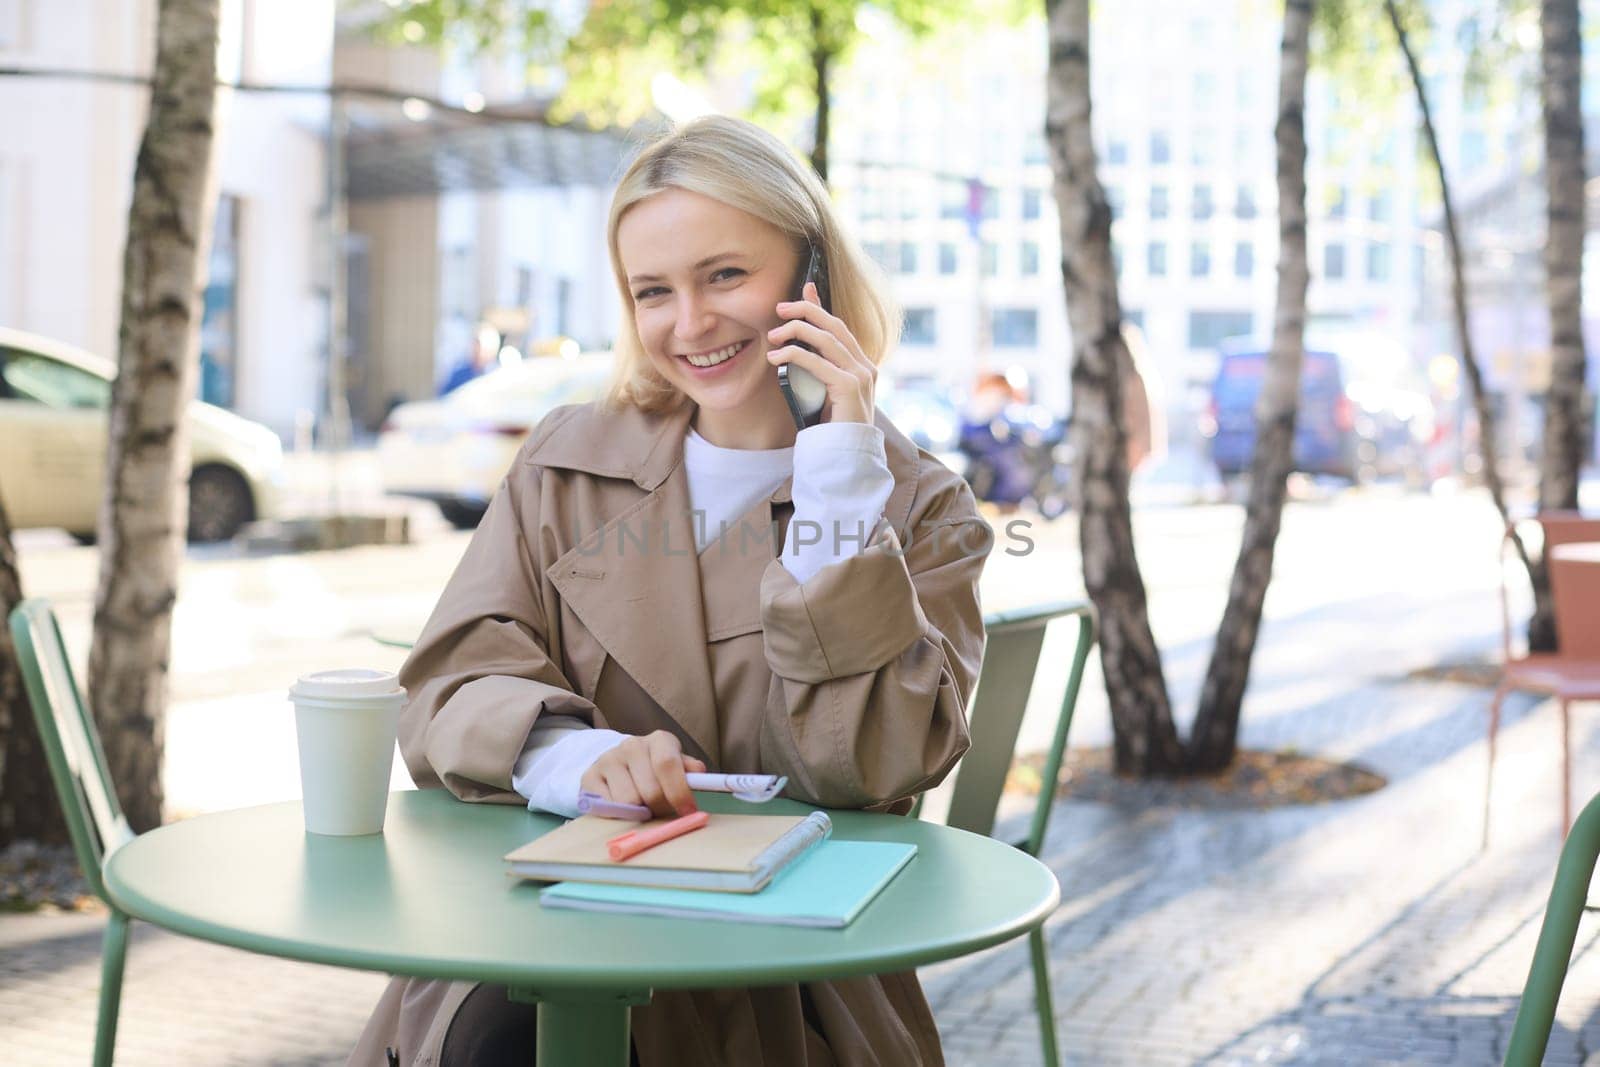 Lifestyle and urban people concept. Young smiling girl, student sitting in cafe outdoors, talking on mobile phone, chatting with friend or coworker over the telephone, studying or doing homework by Benzoix